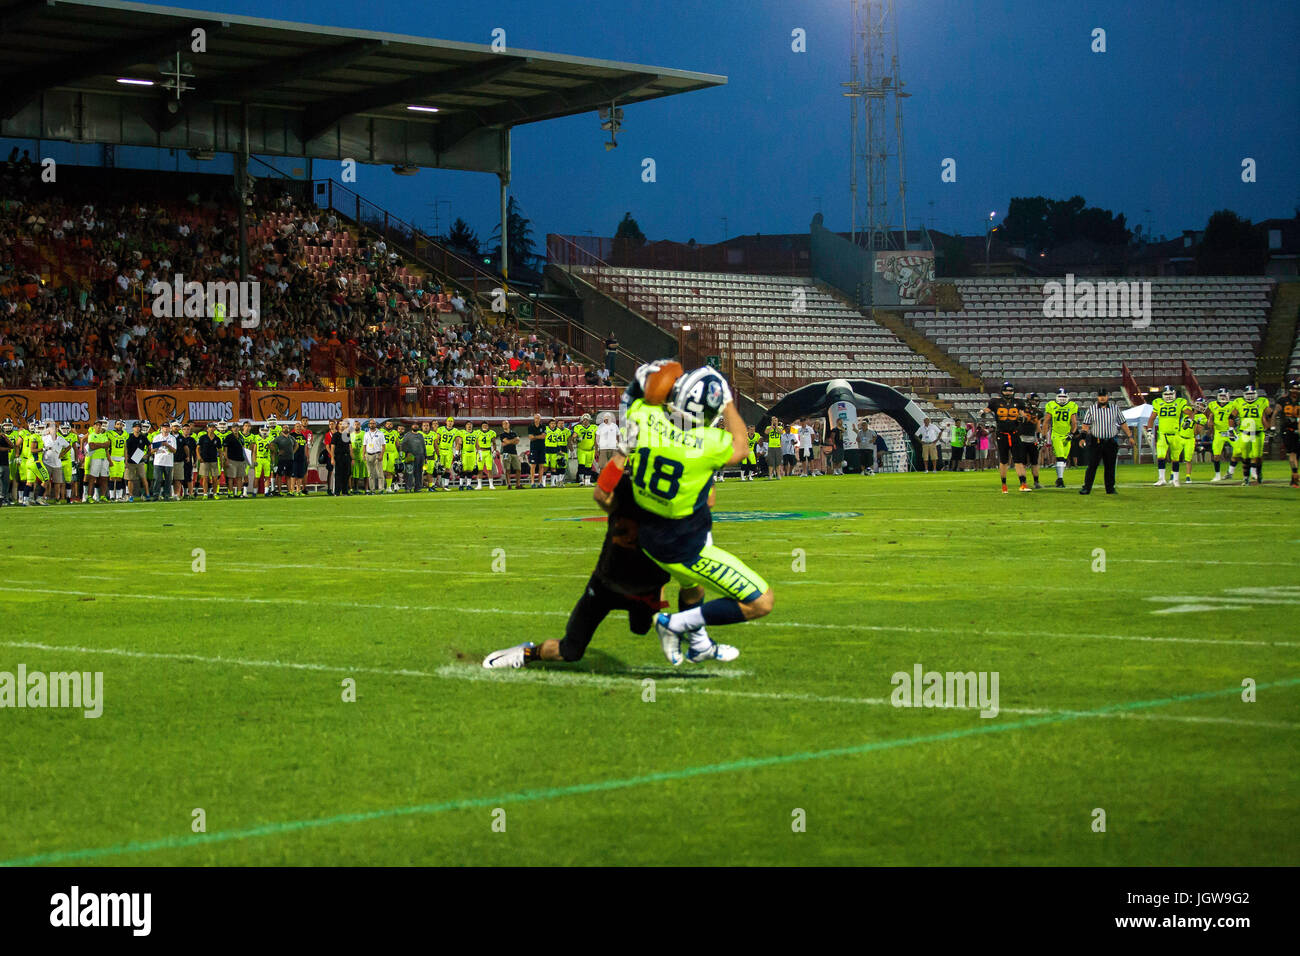 Vicenza, Italy. 08th July, 2017. For the first time in the Milano Seamen's short history, they will be facing crosstown rivals and defending champions, the Milano Rhinos in the Italian Bowl Saturday July 8 in Stadio Romeo Menti, Vicenza. Credit: Antonio Melita/Pacific Press/Alamy Live News Stock Photo